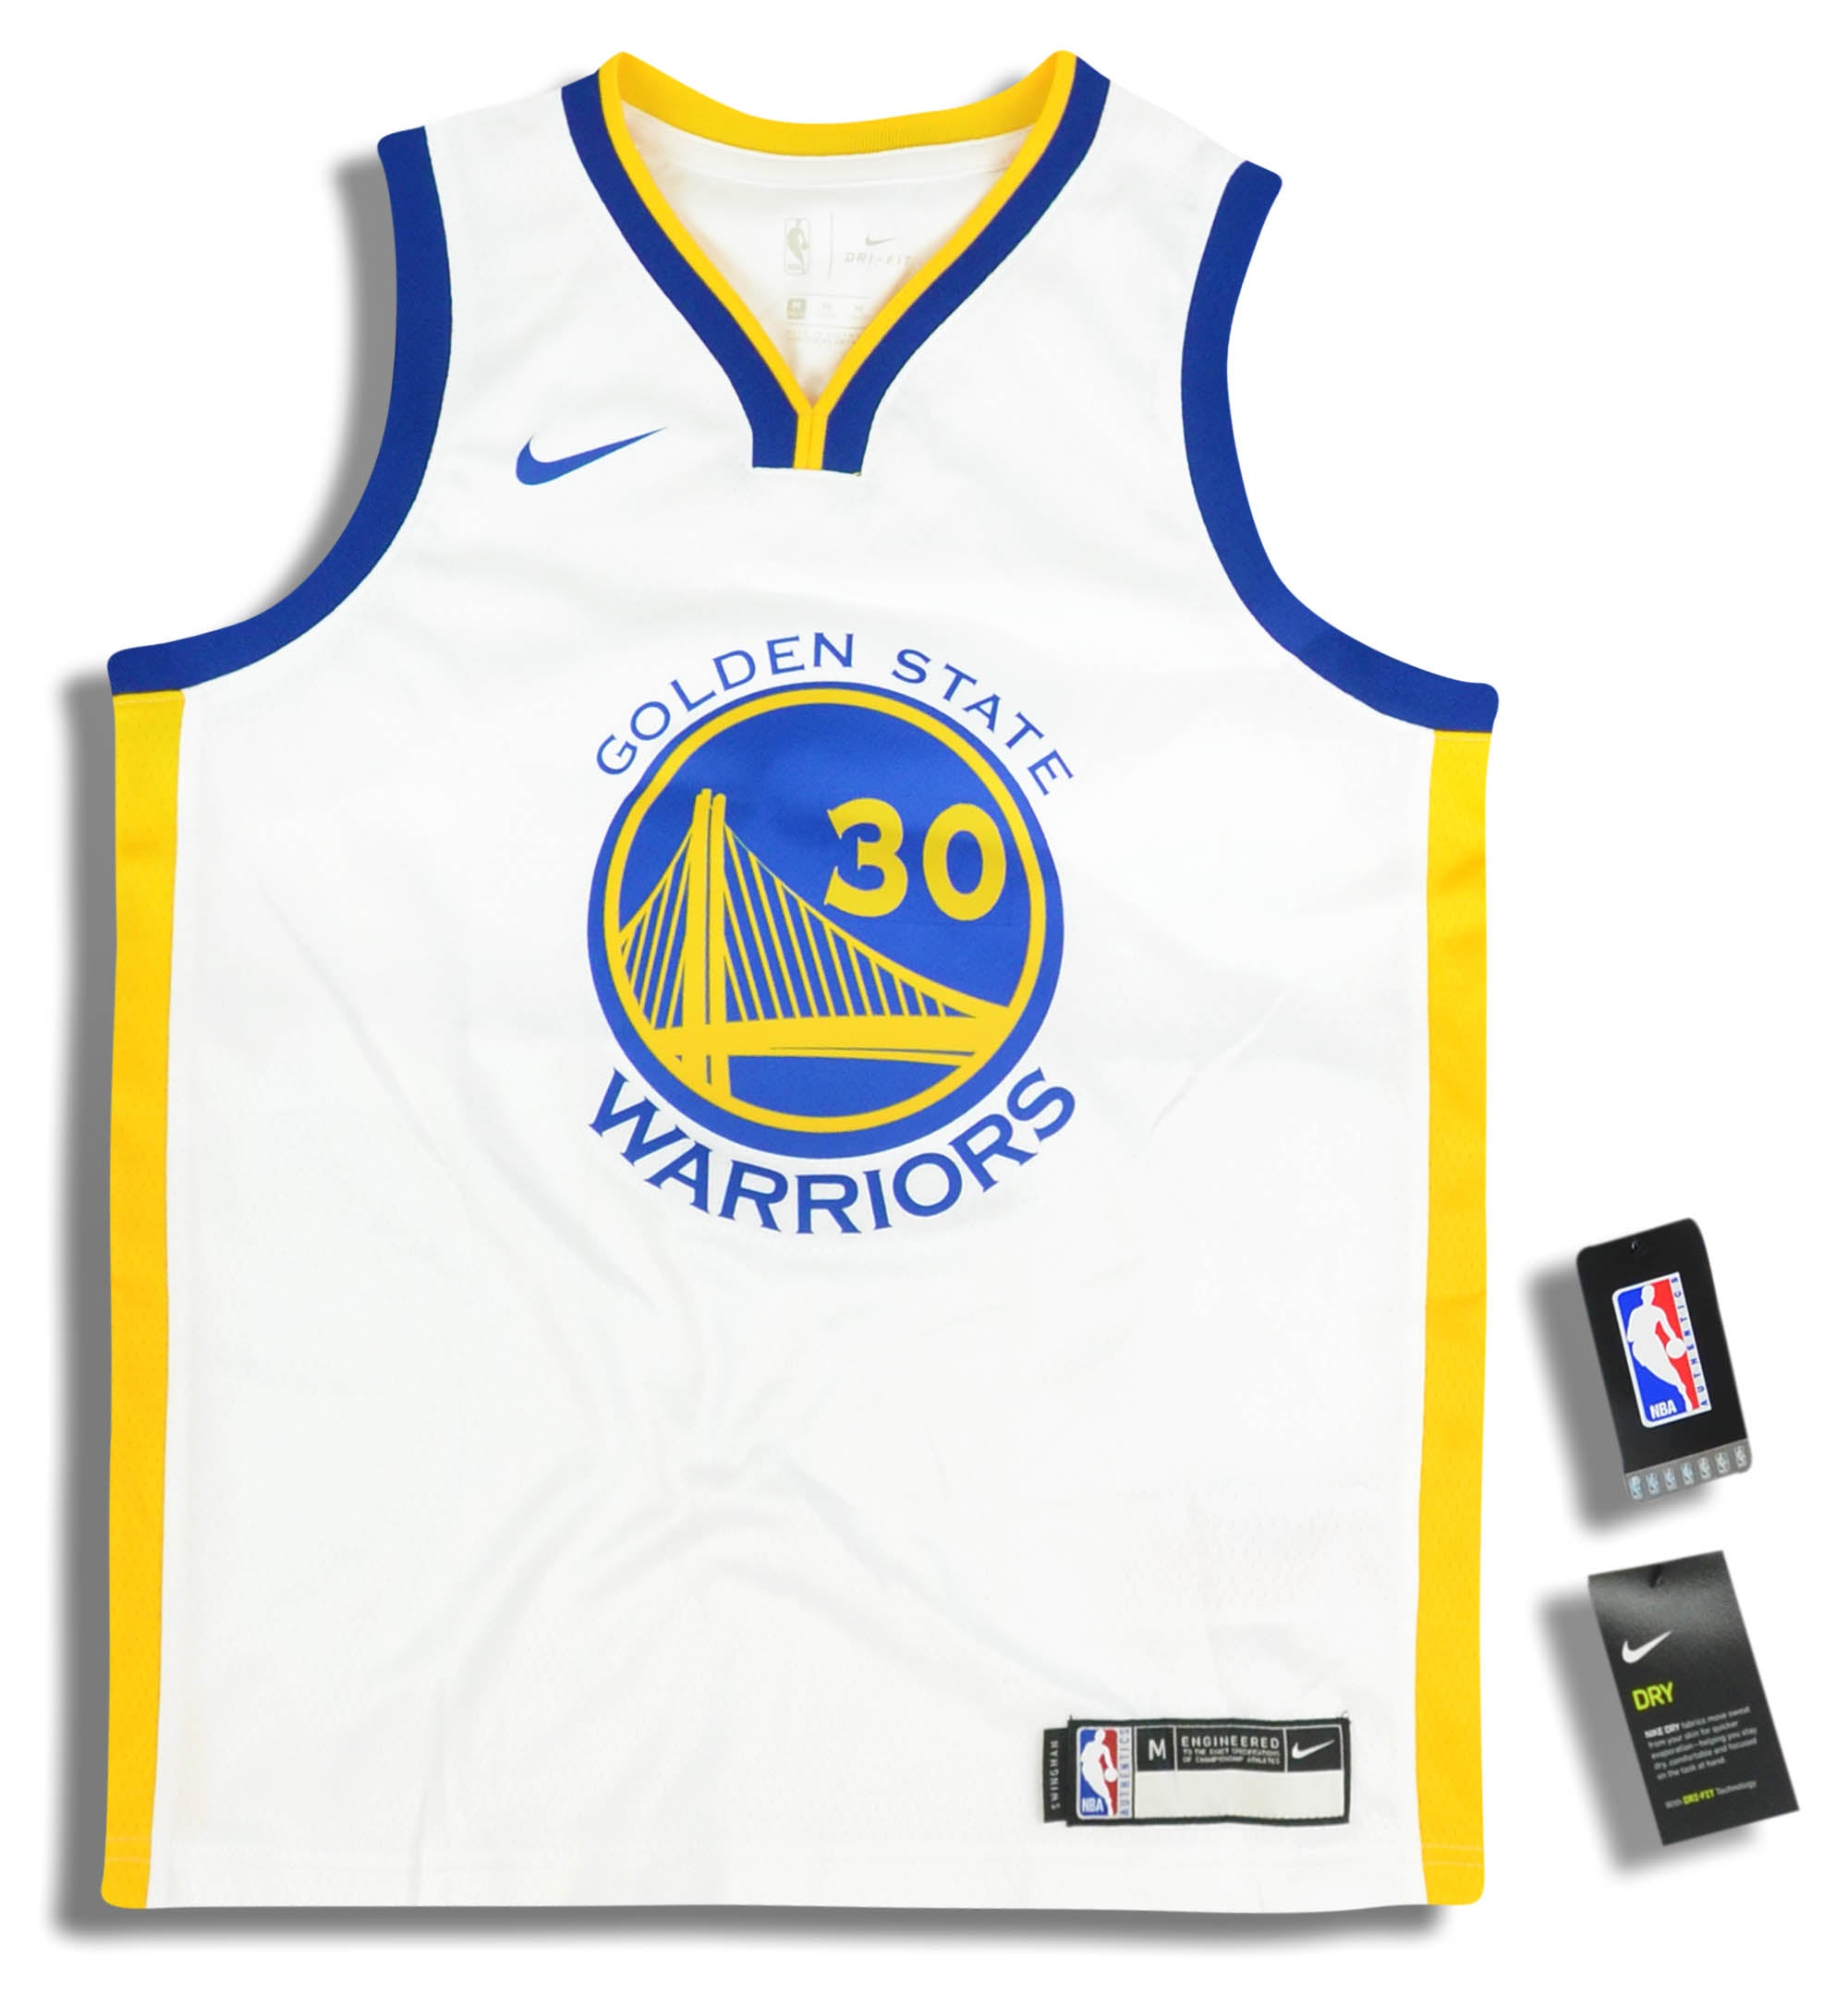 Mens Stephen Curry #30 Yellow Earned 2018-19 Golden State Warriors